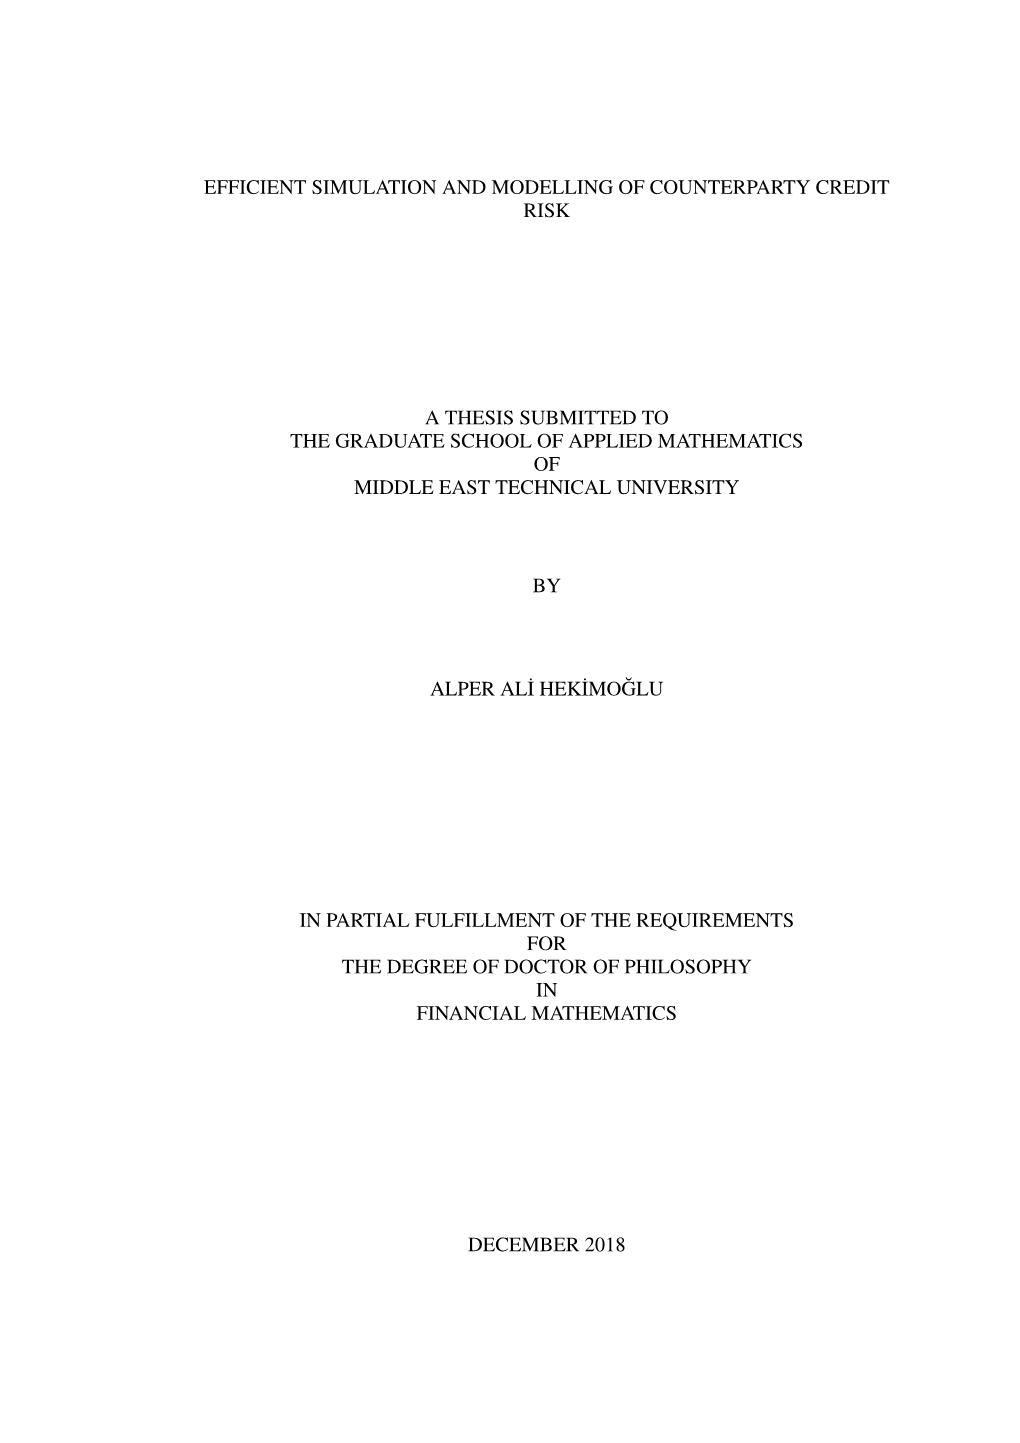 Efficient Simulation and Modelling of Counterparty Credit Risk a Thesis Submitted to the Graduate School of Applied Mathematics